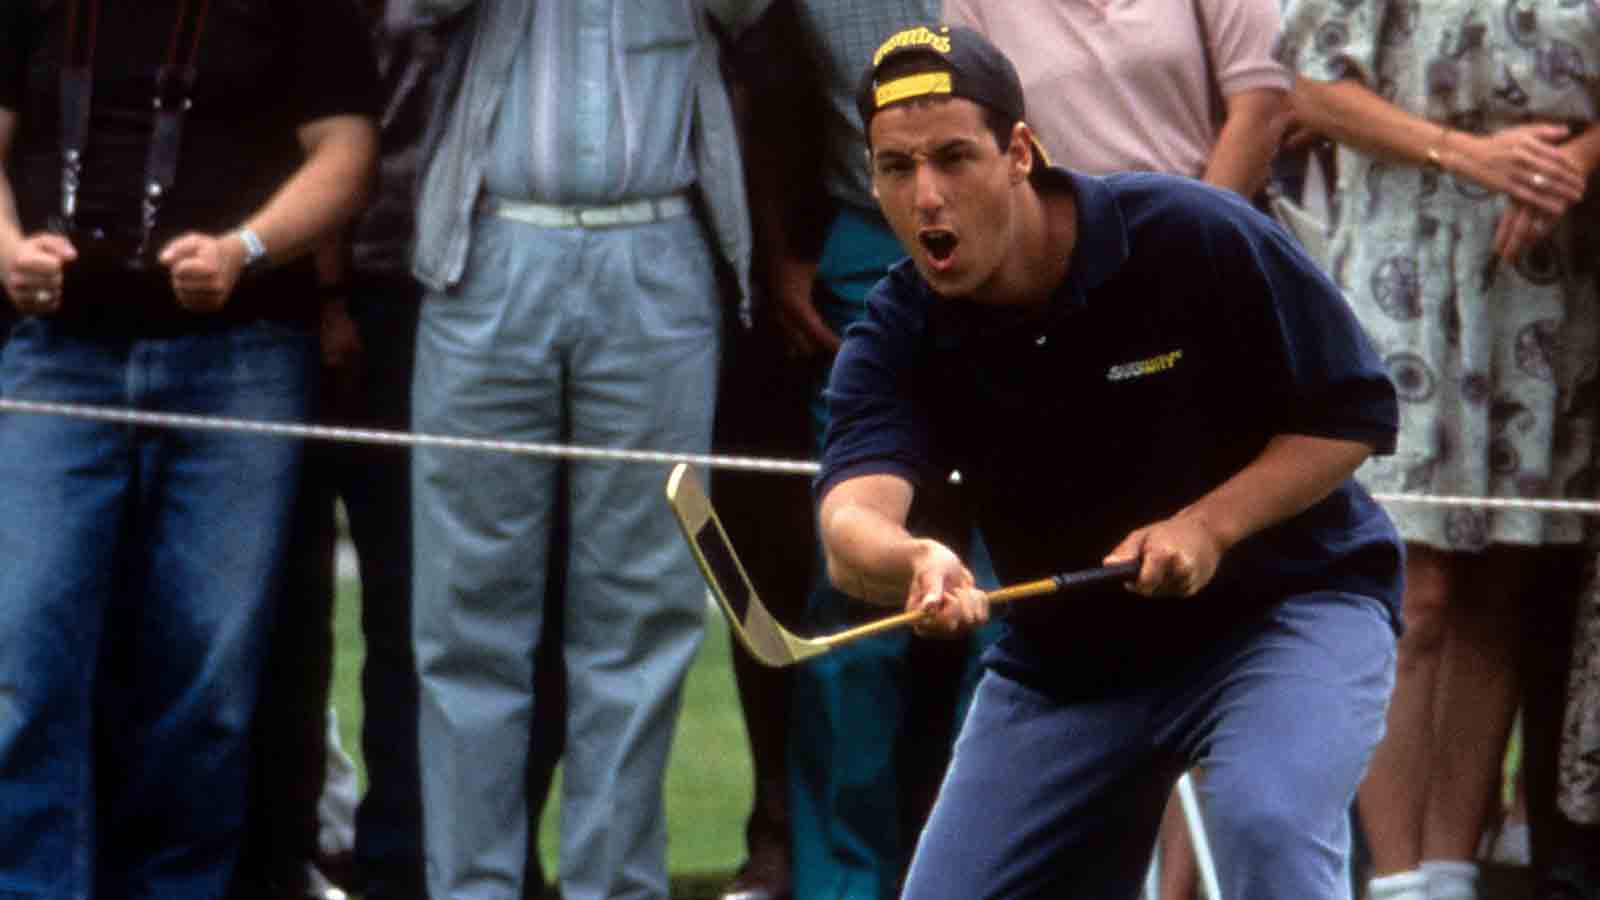 Netflix confirms ‘Happy Gilmore' sequel with Adam Sandler is in the
works